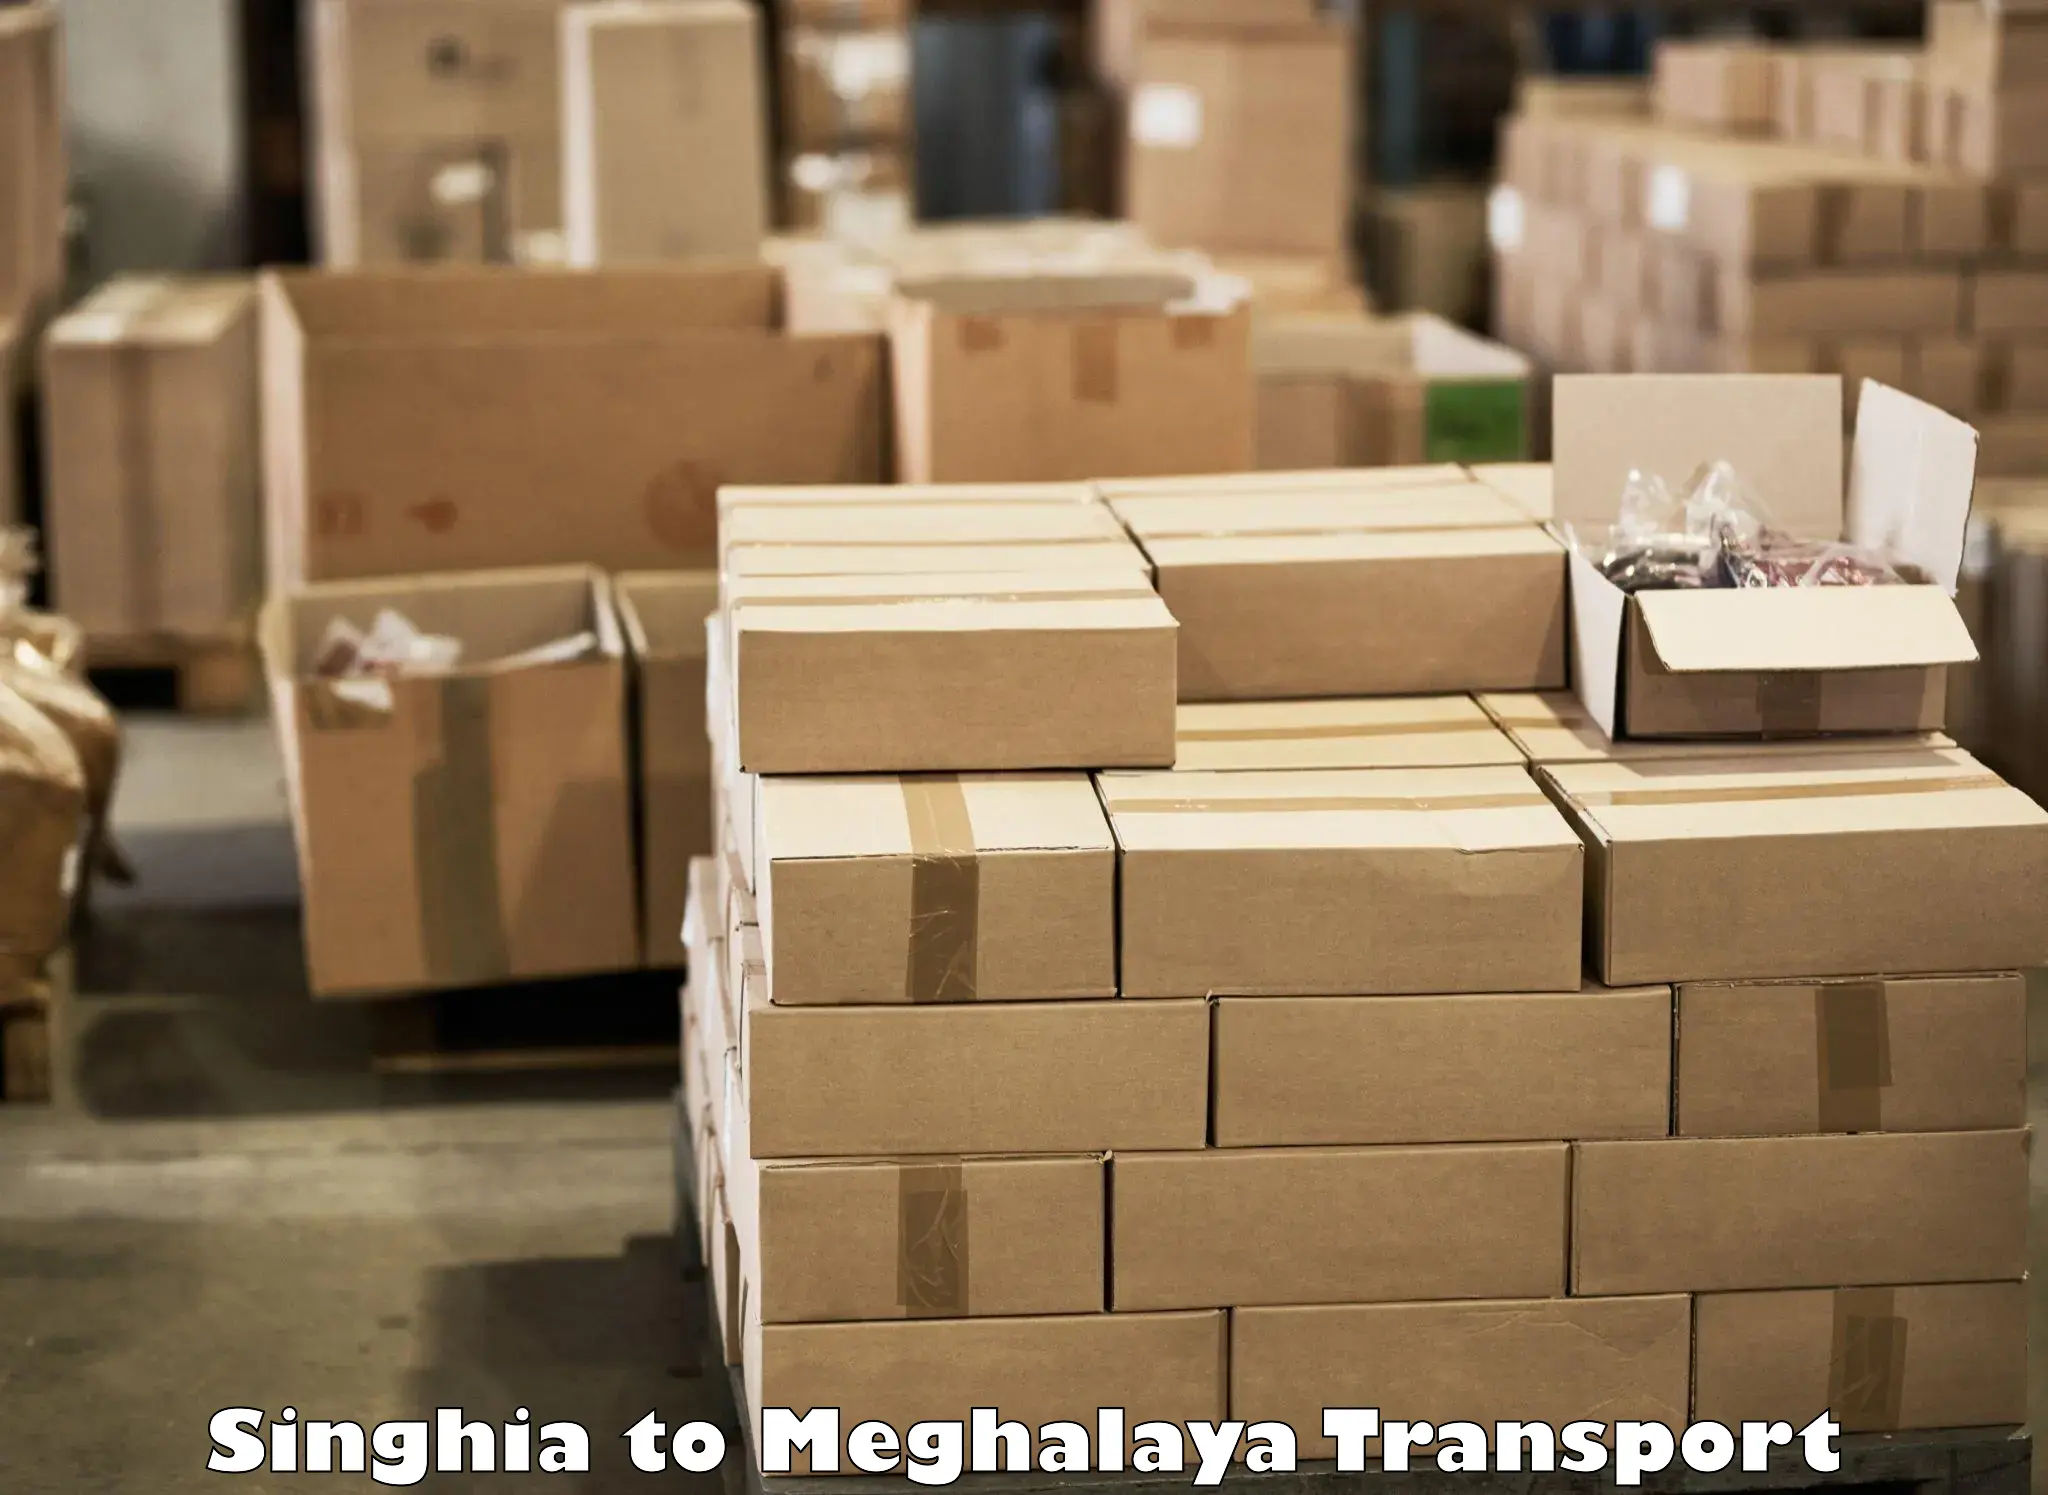 Container transport service Singhia to Shillong